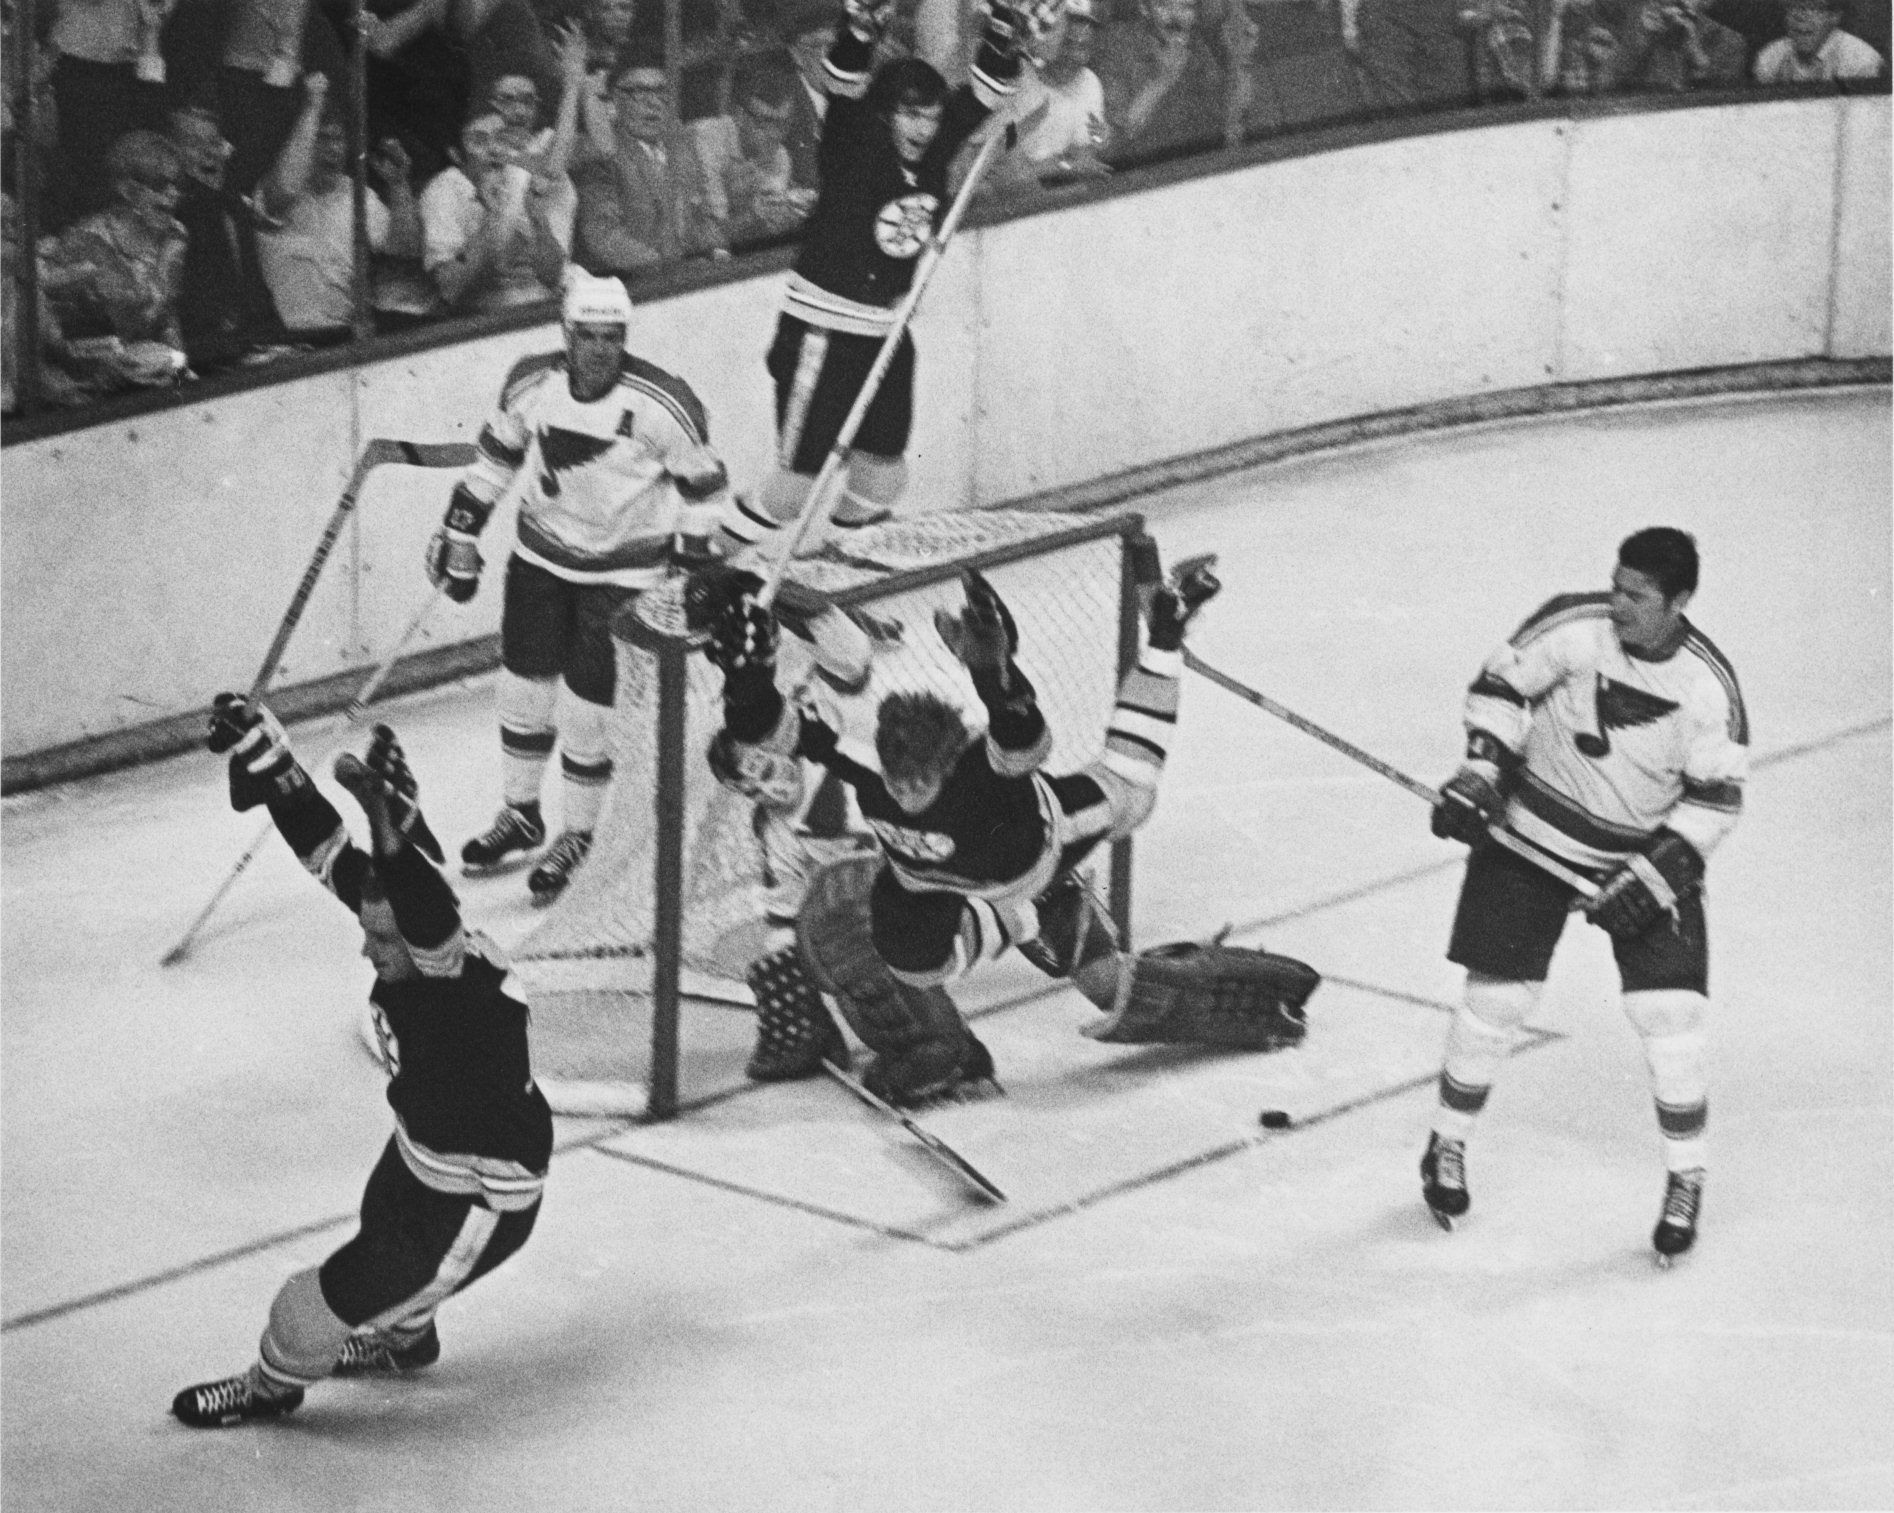 SCORE!!! BOBBY ORR!!! -- as called by Fred Cusick with Johnny